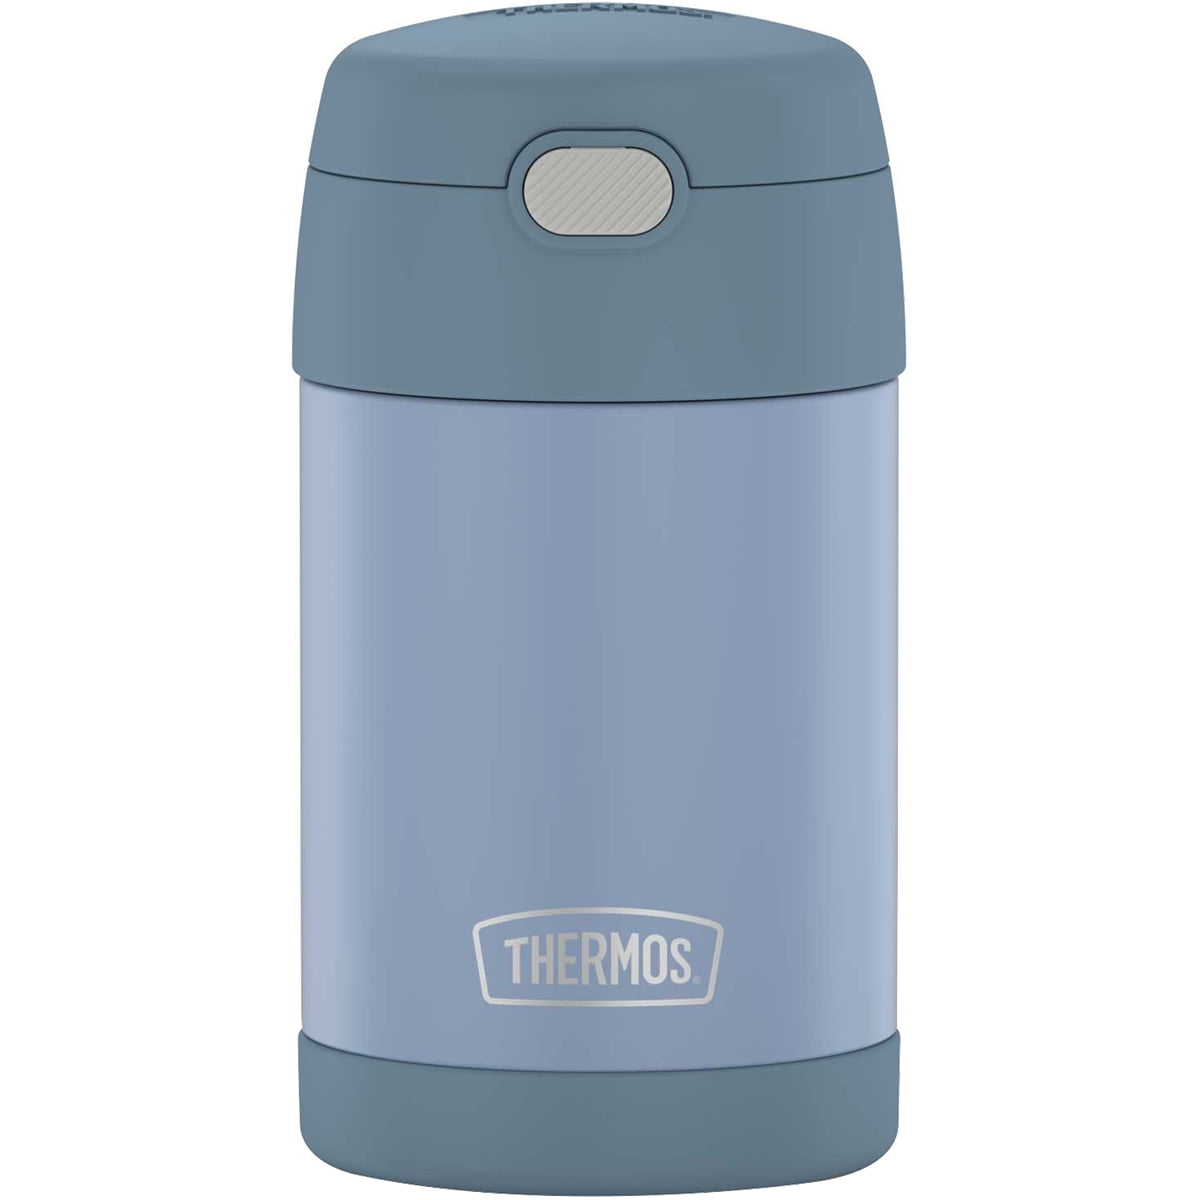 Thermos 16 oz. Kid's Funtainer Stainless Steel Insulated Food Jar - Denium  Blue